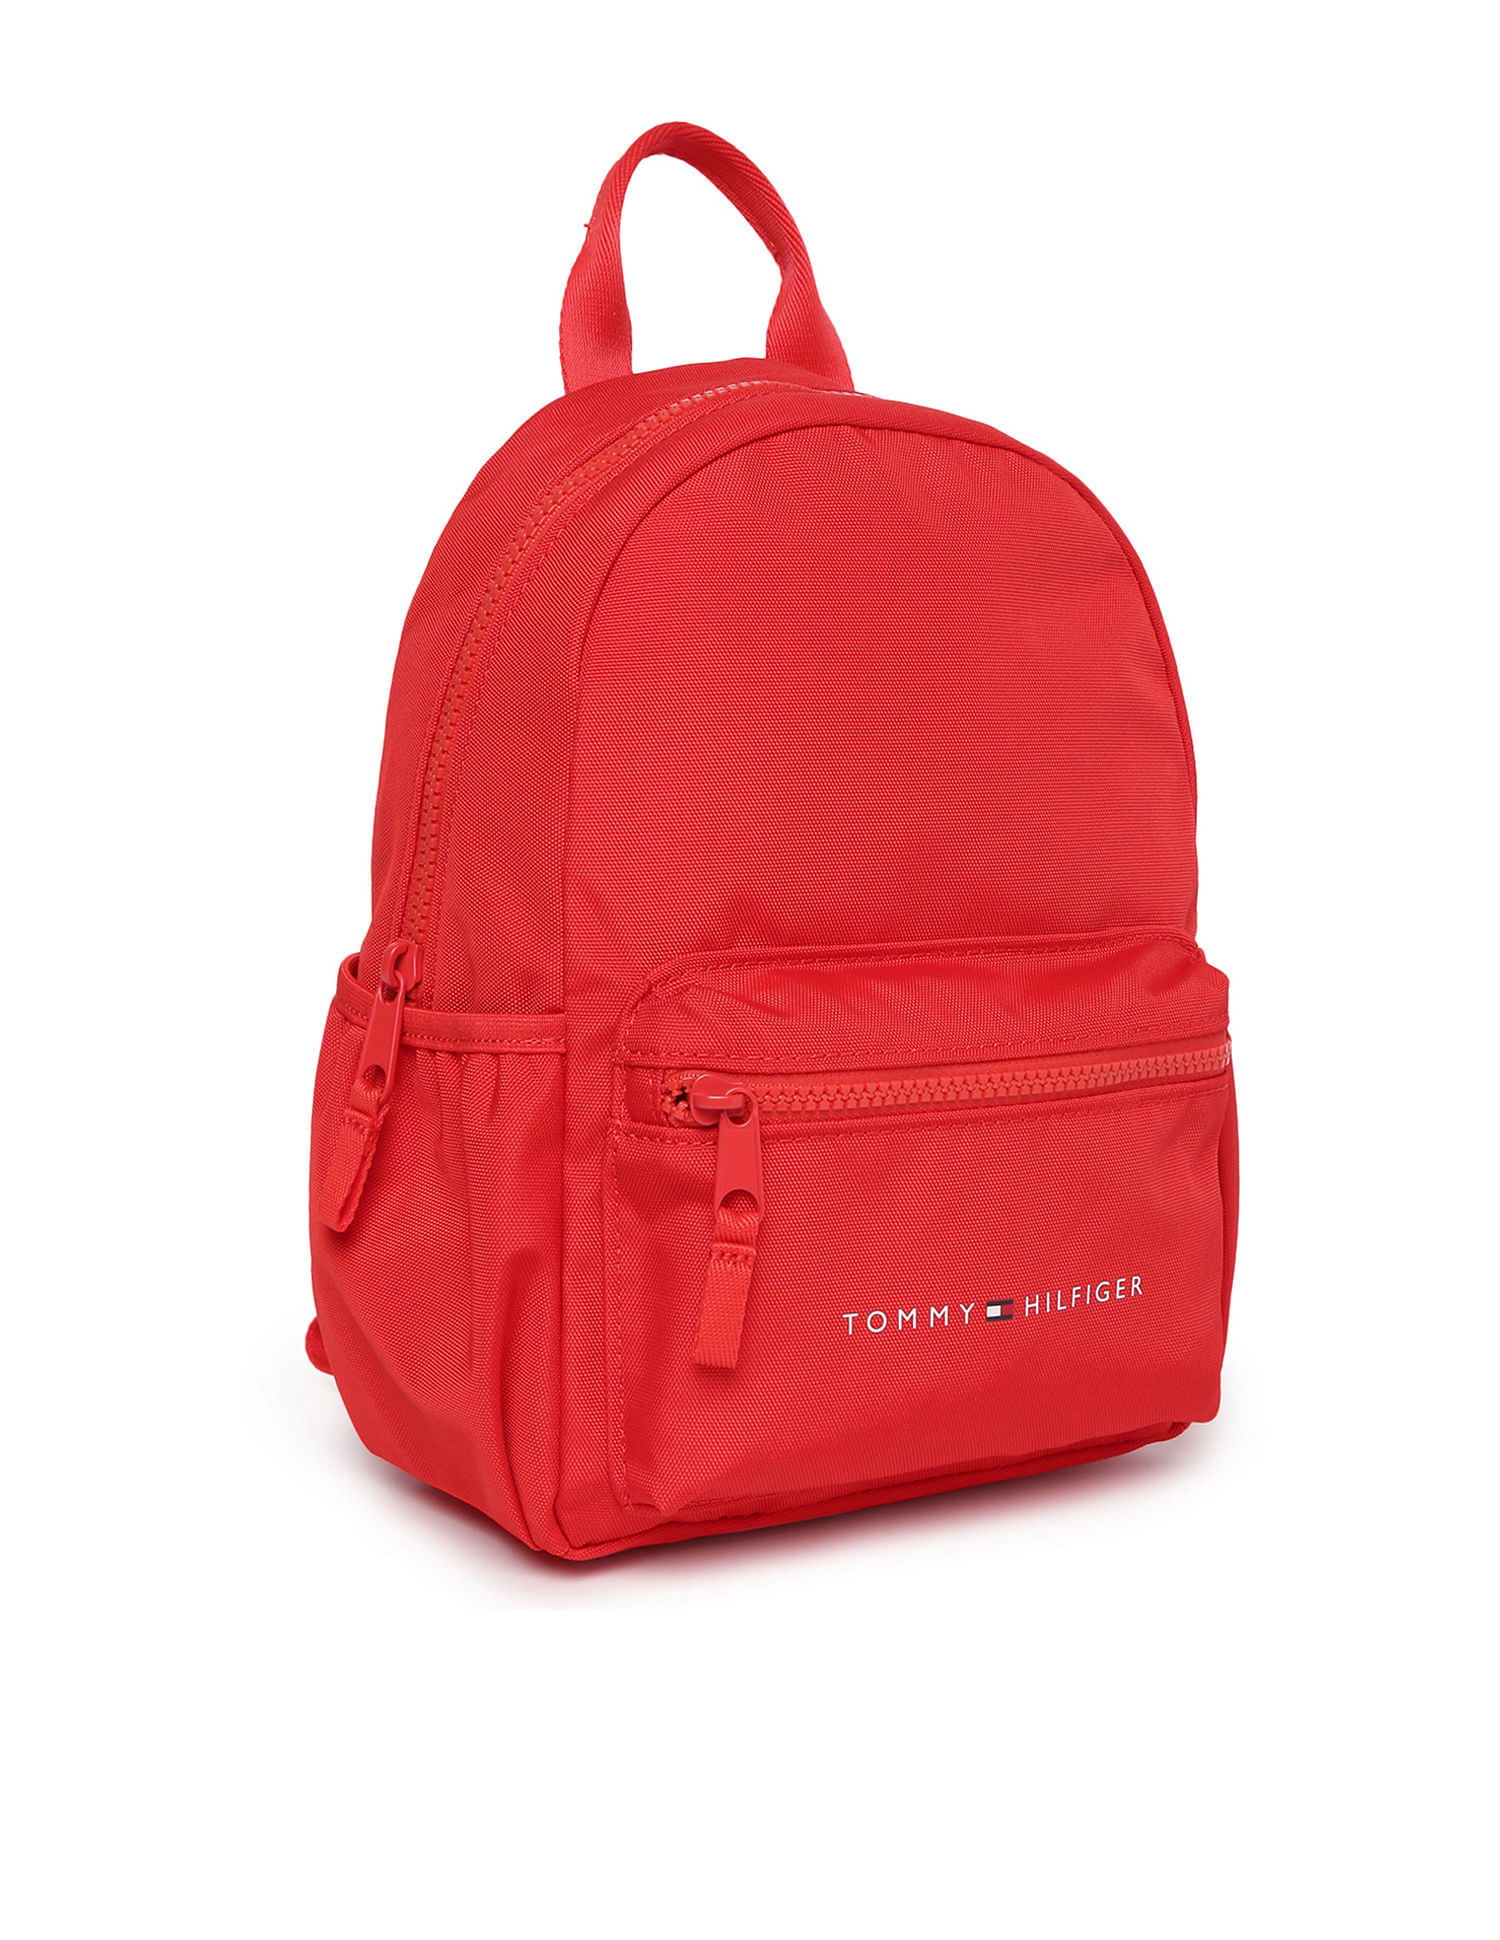 Shop Tommy Hilfiger Red Mini Fashion Backpack – Luggage Factory